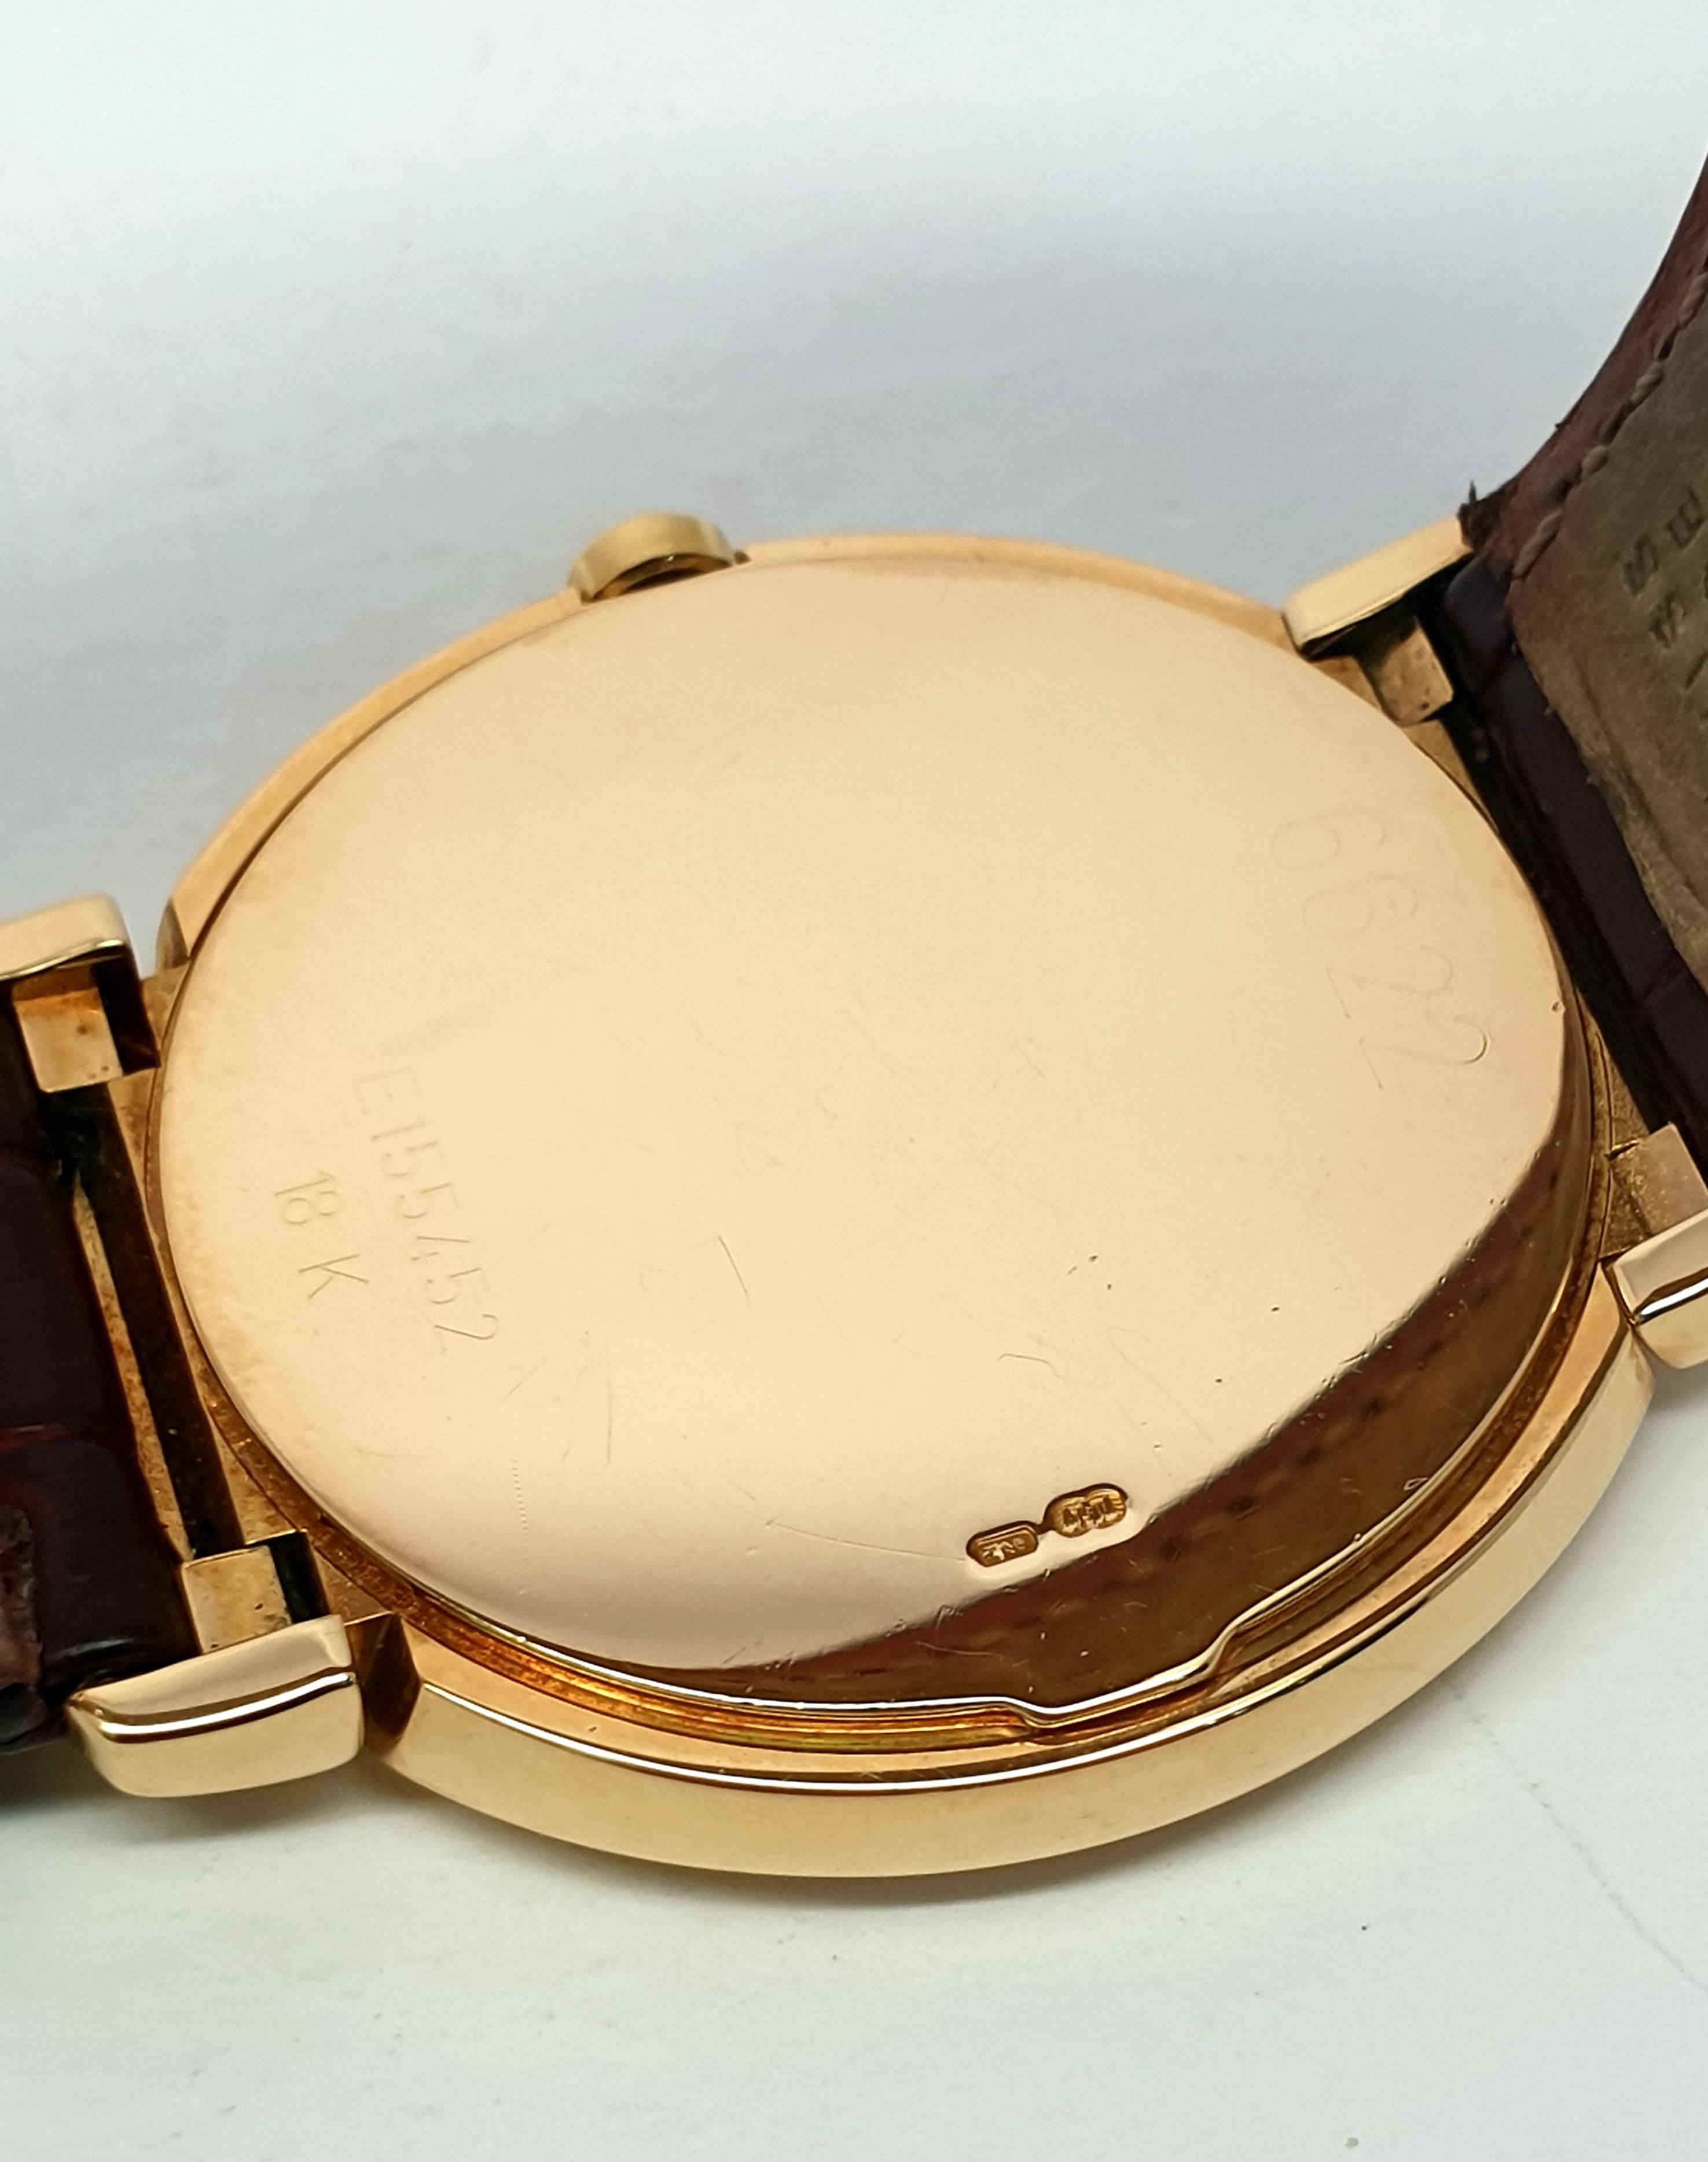 Offering a Rolex Cellini  18 Kt yellow gold watch.Model: 6622 from 1991. The watch comes with burgundy color Rolex  strap shows wear ,but still usable,yellow gold Rolex deployment buckle . The dial is dark gray with Rolex logo in print. The 18 kt